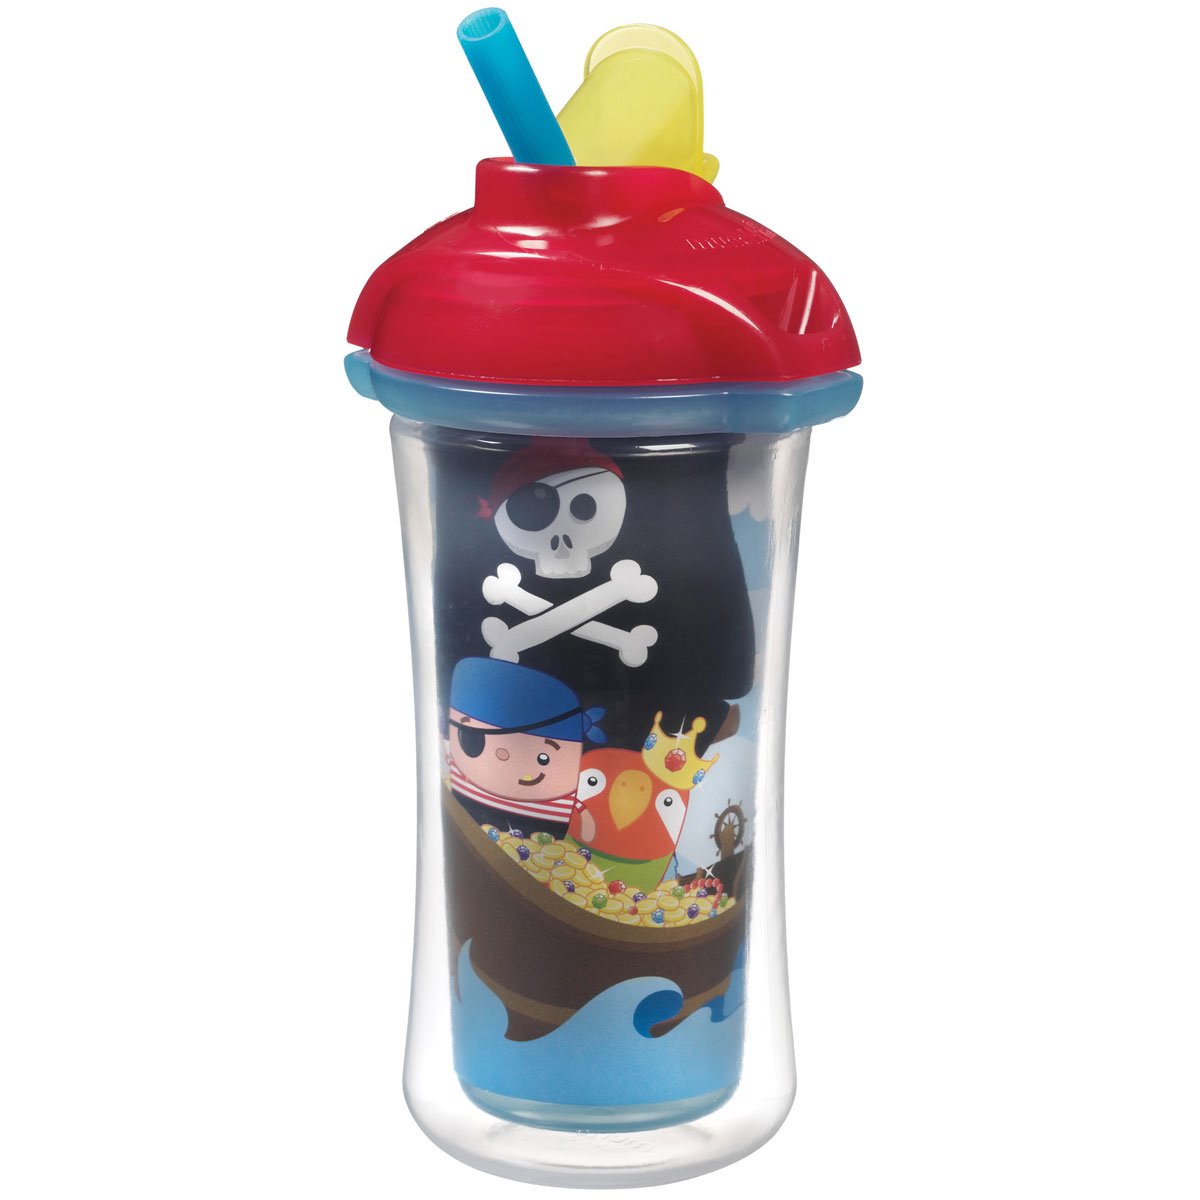 Sesame Street Click Lock Insulated Sippy Cups 2 pack - 9 oz. (Munchkin)